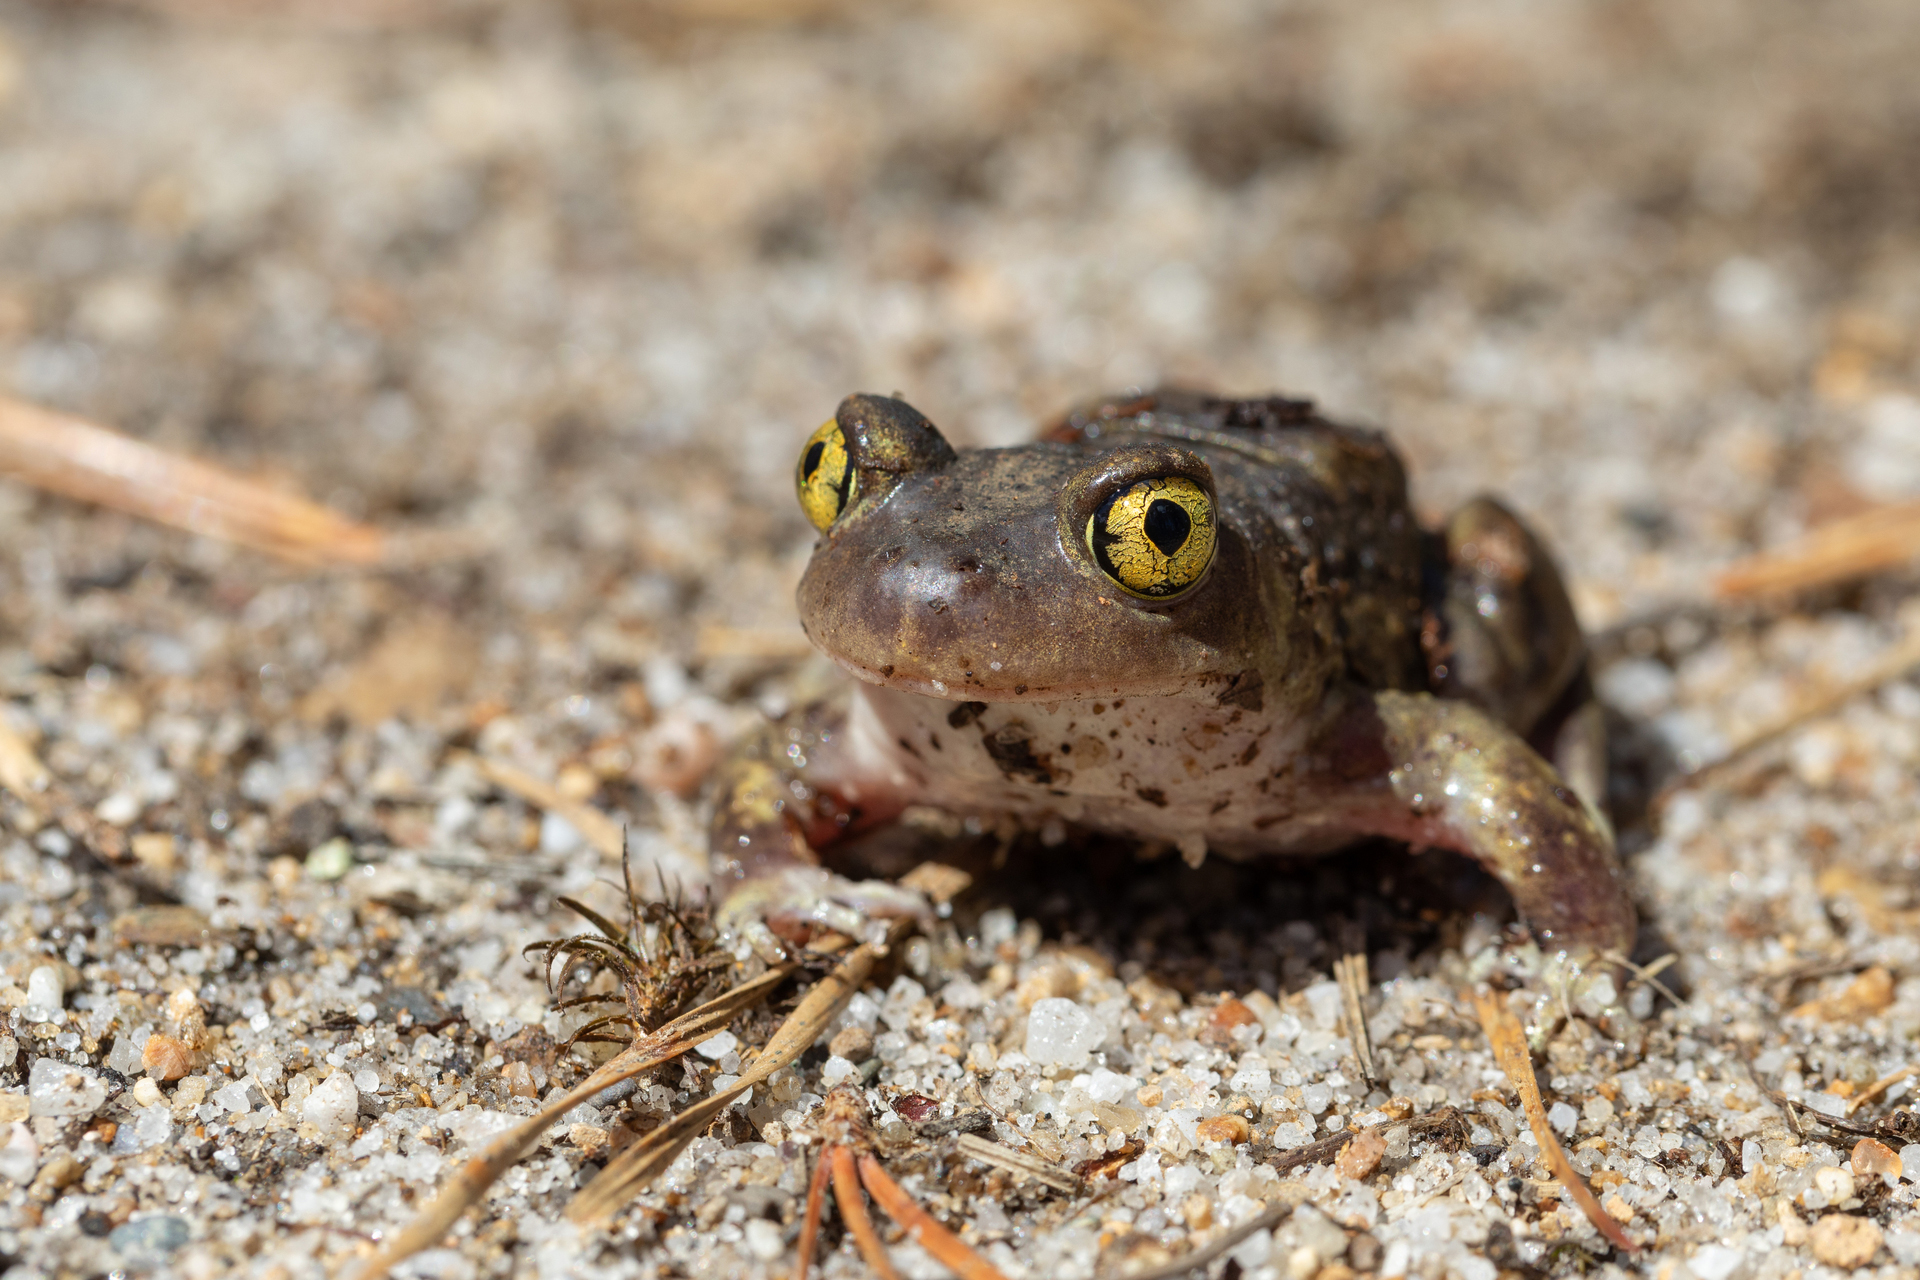 Spadefoot toad on a bed of sand and twigs